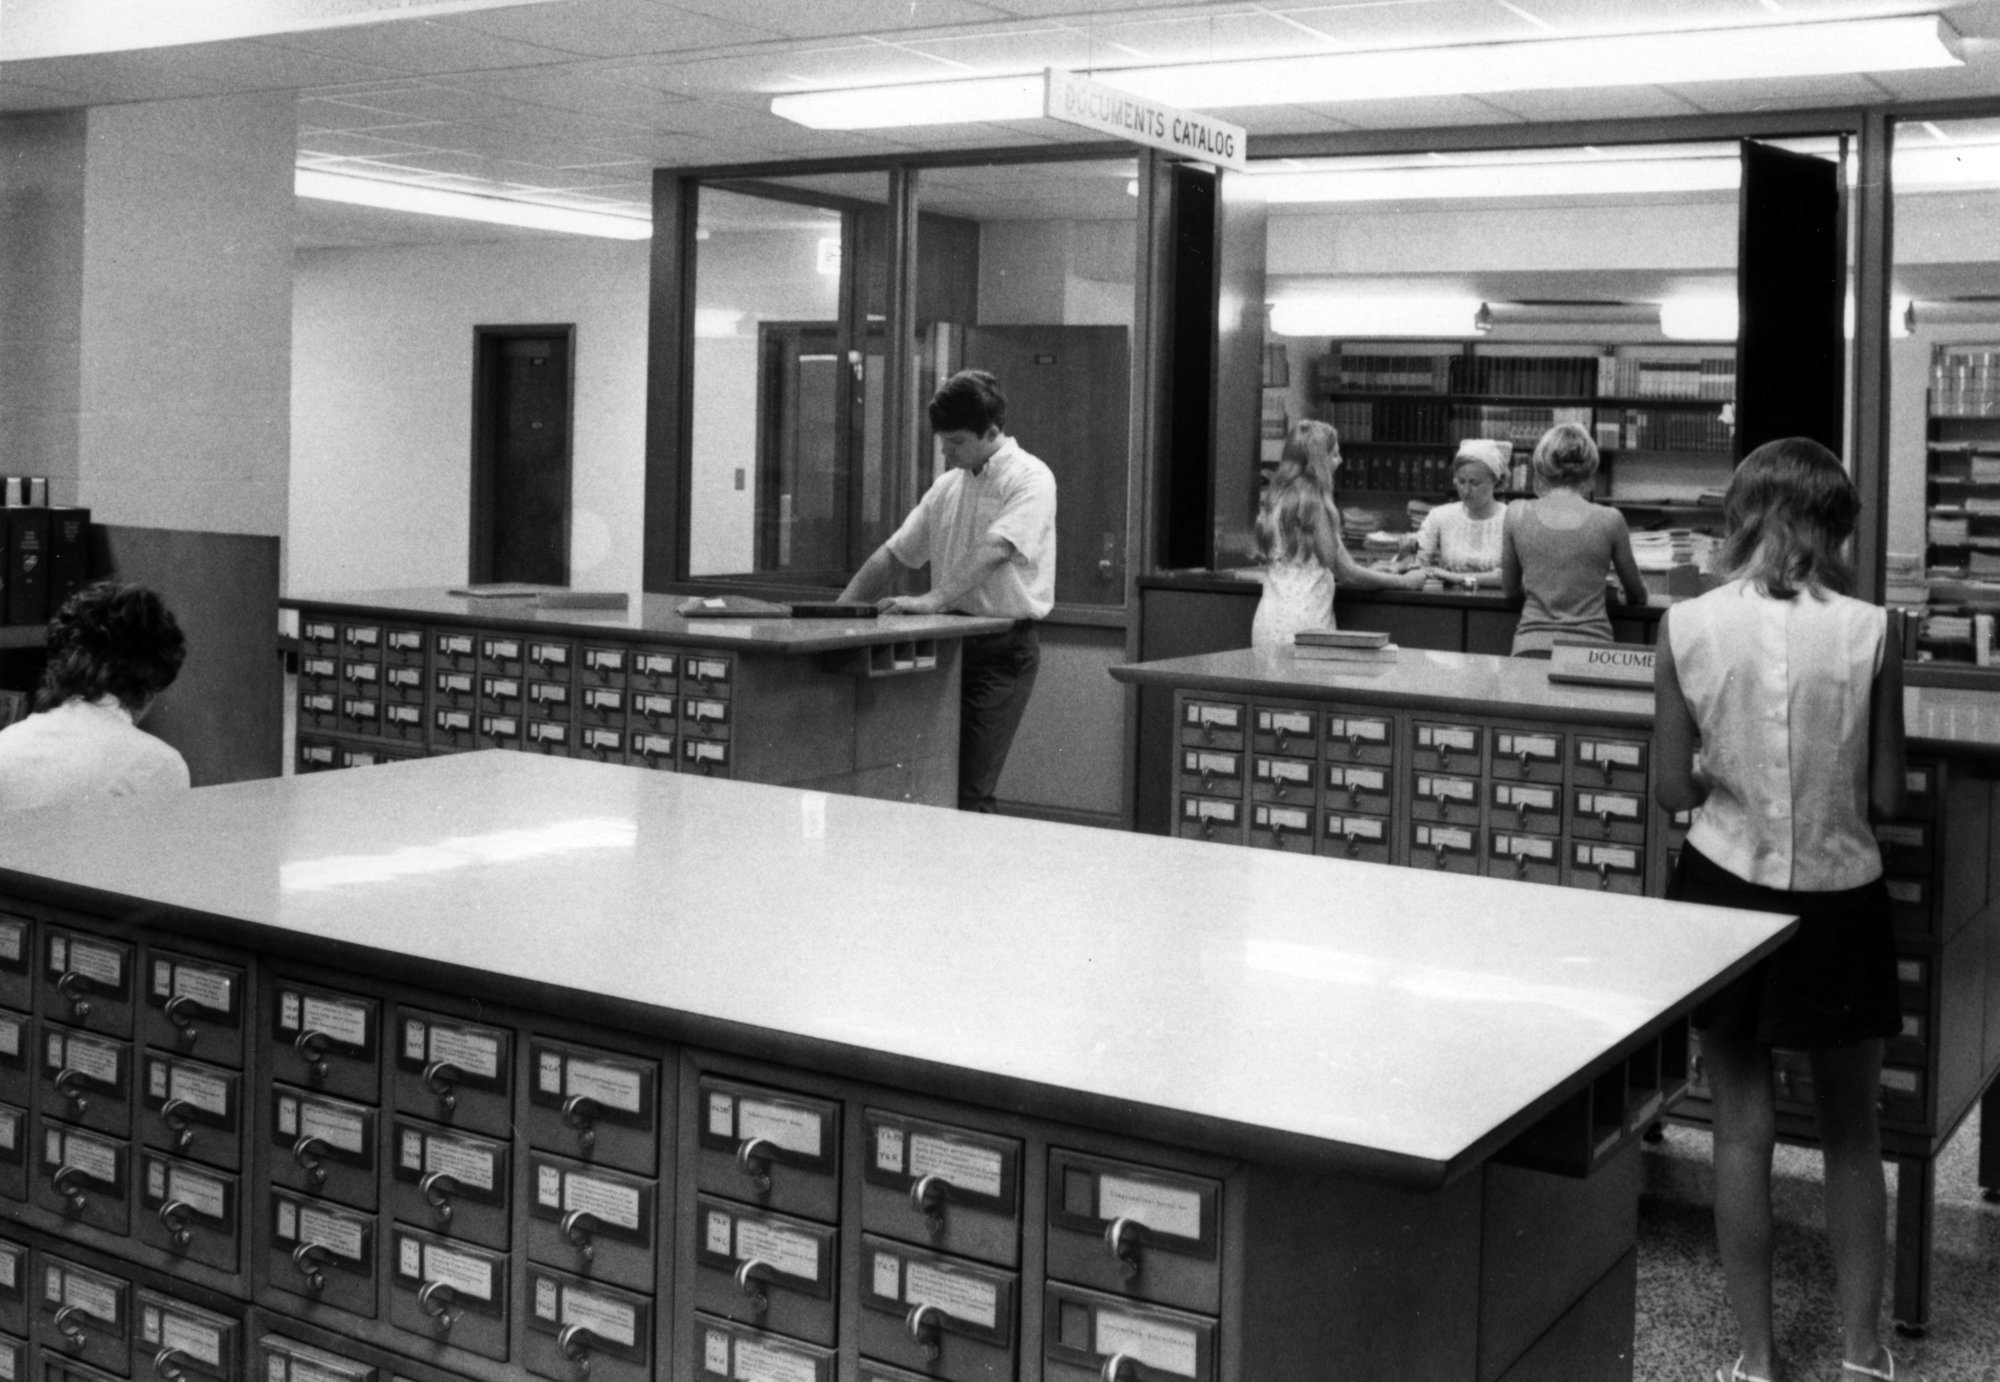 "The card catalog in the library. Use that thing or just wander over in the direction of where you think books are that you like or need." -saatana